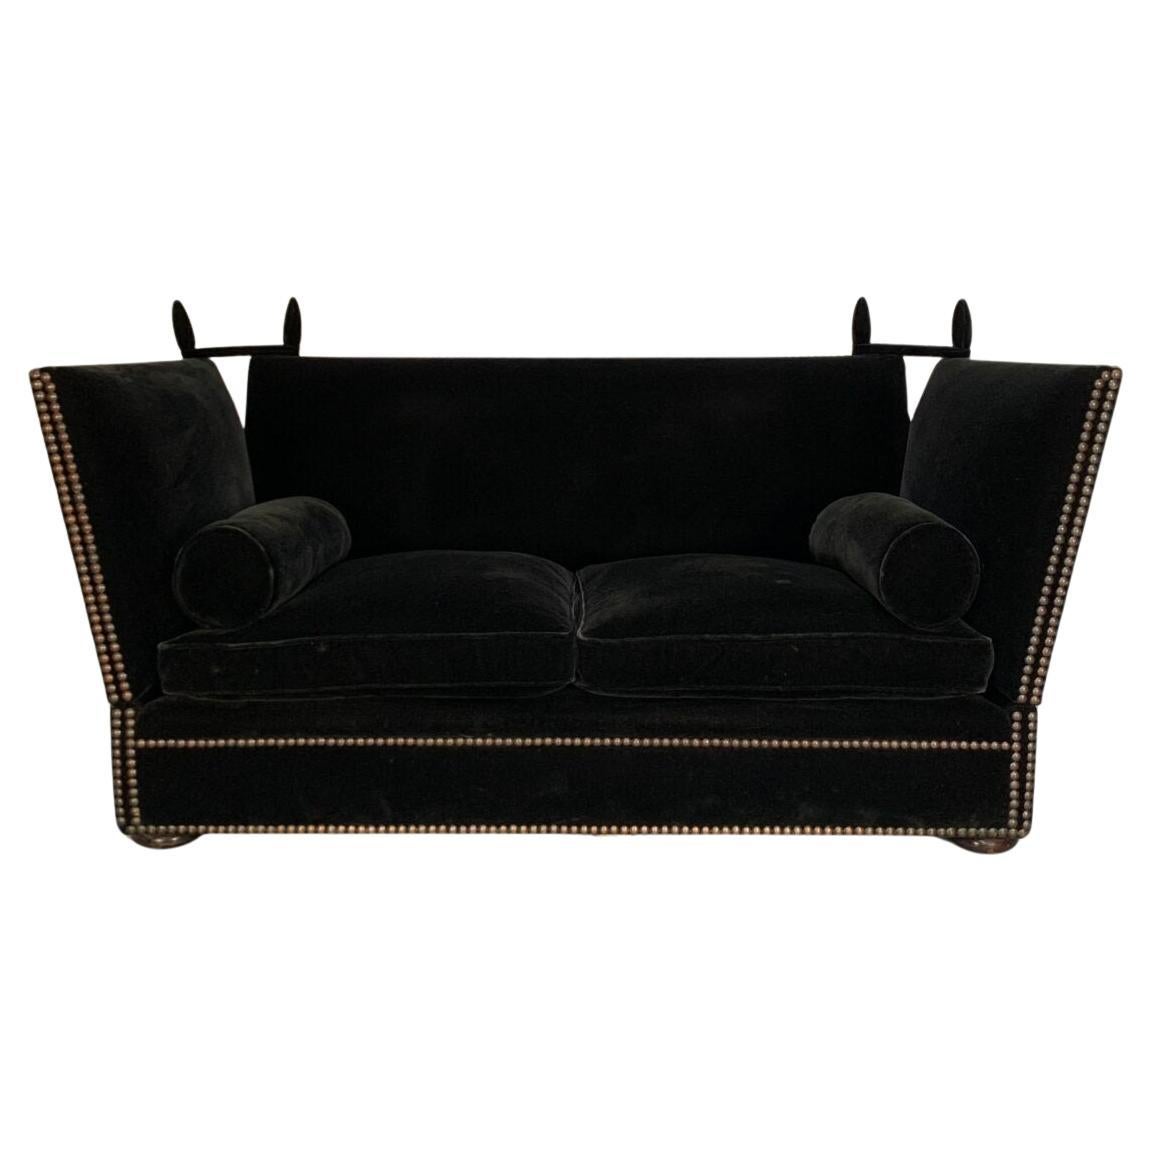 George Smith Signature "Tiplady" Knole 2.5-Seat Sofa - In Black Mohair Velvet